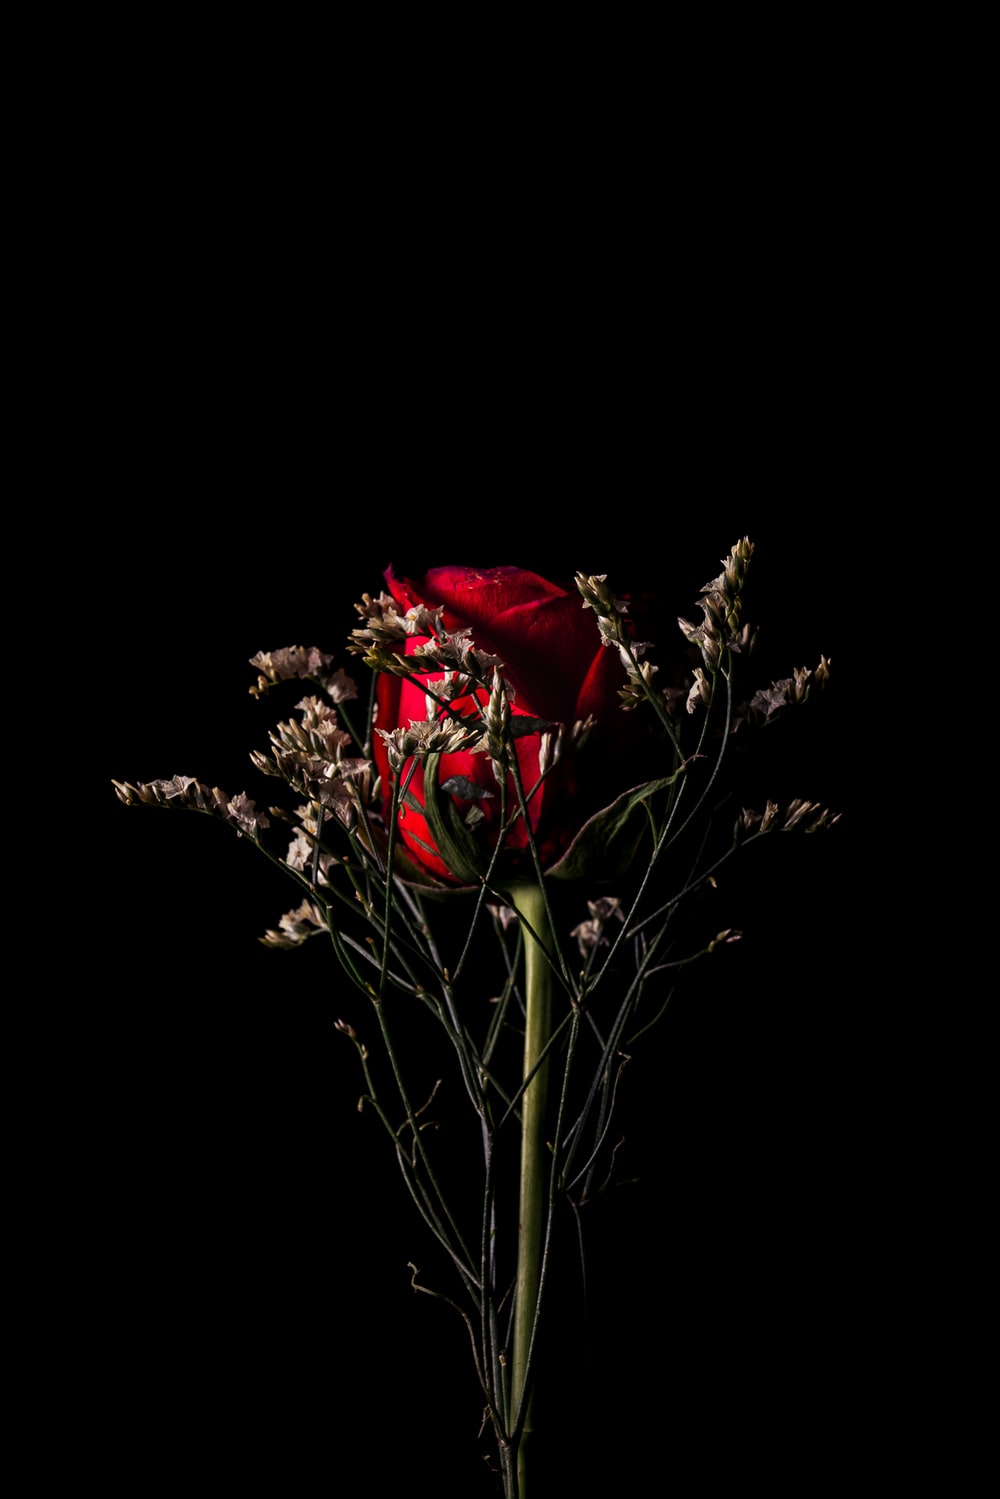 Red Rose Behind White Flowers In Black Background Photo